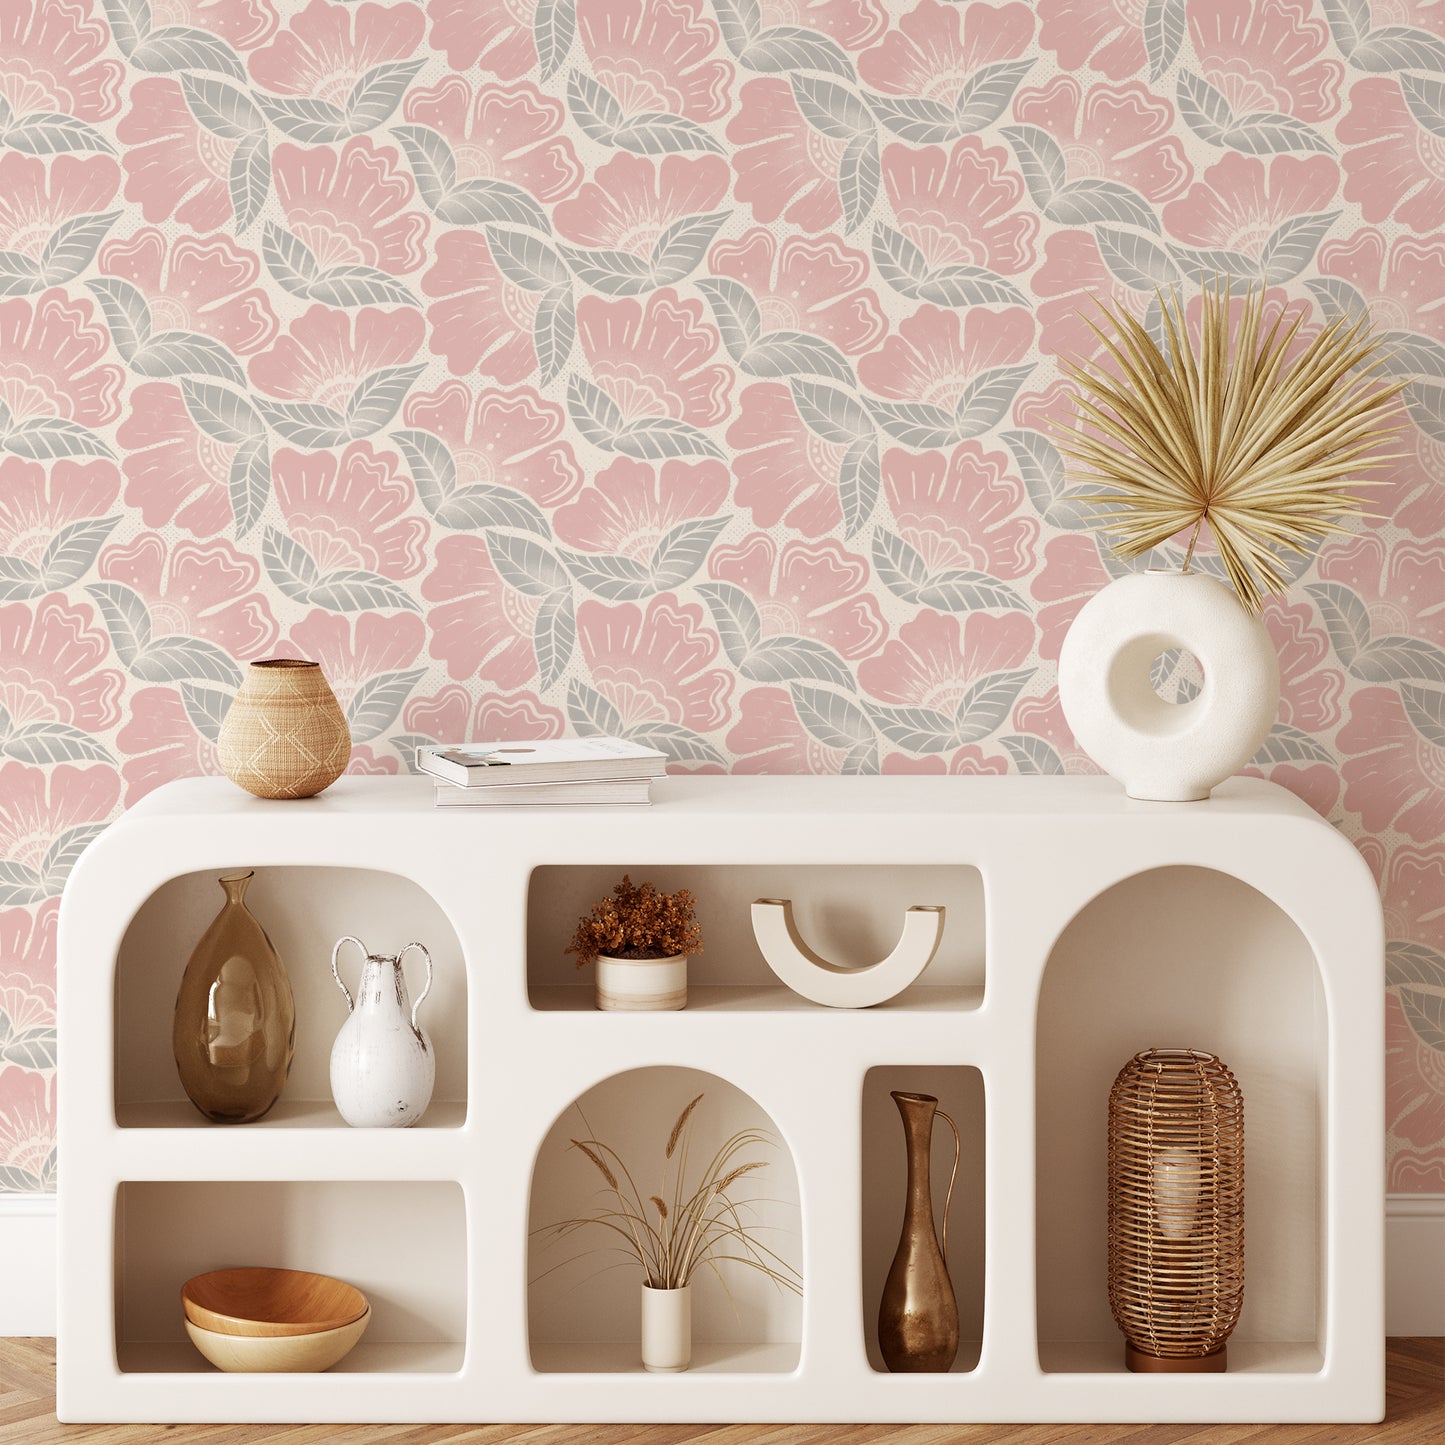 Scattered Flowers Wallpaper in Rosy Pink shown in a living room.